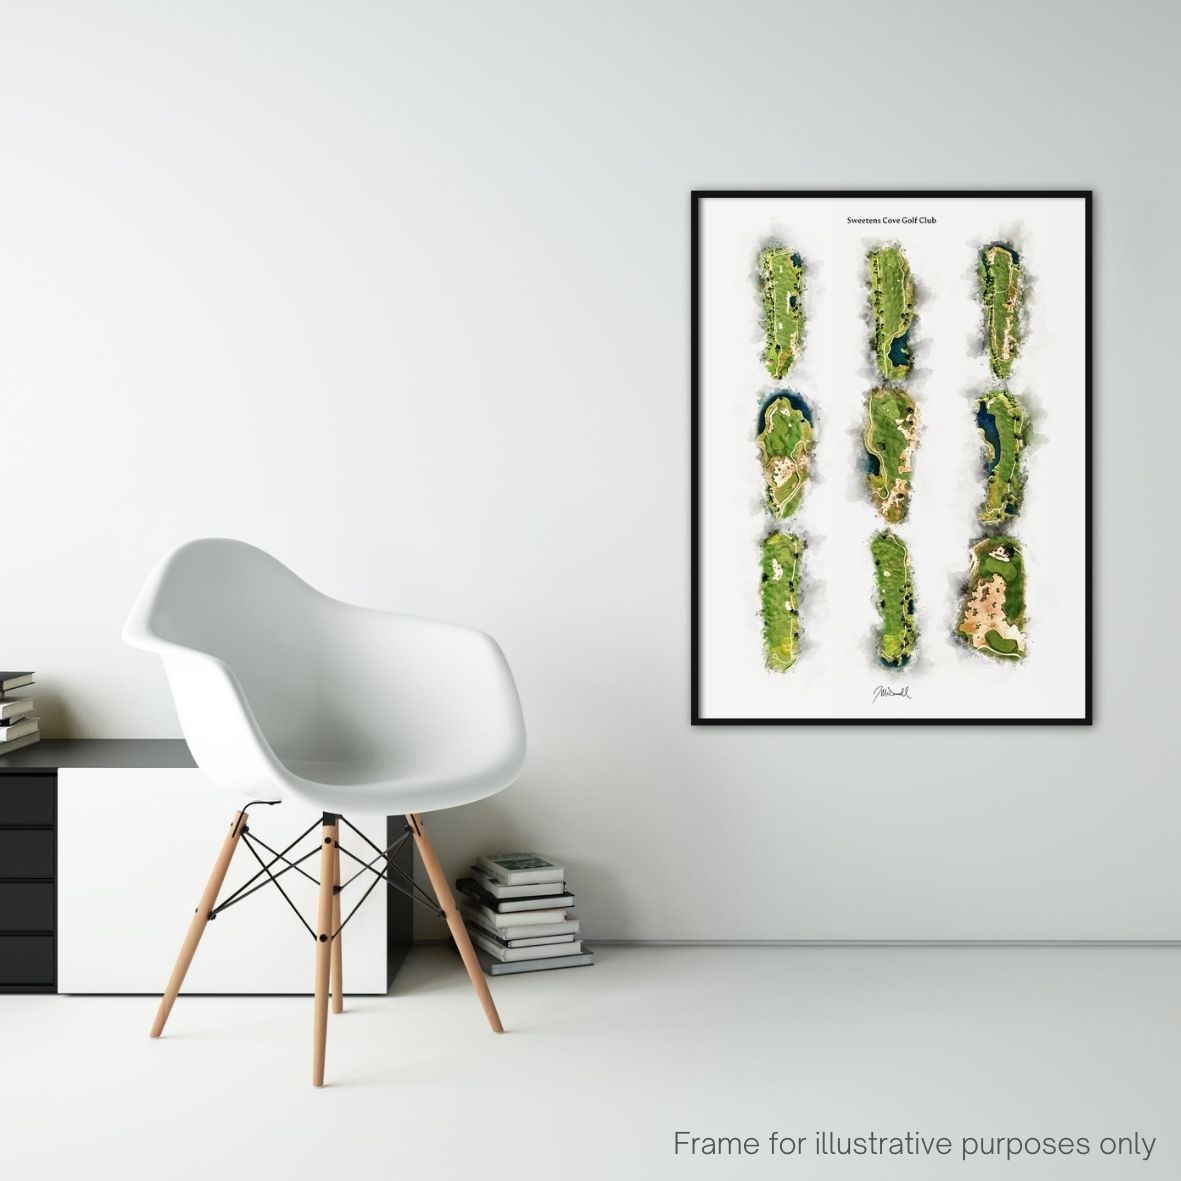 Sweetens Cove Golf Club Compilation Print, Large Frame